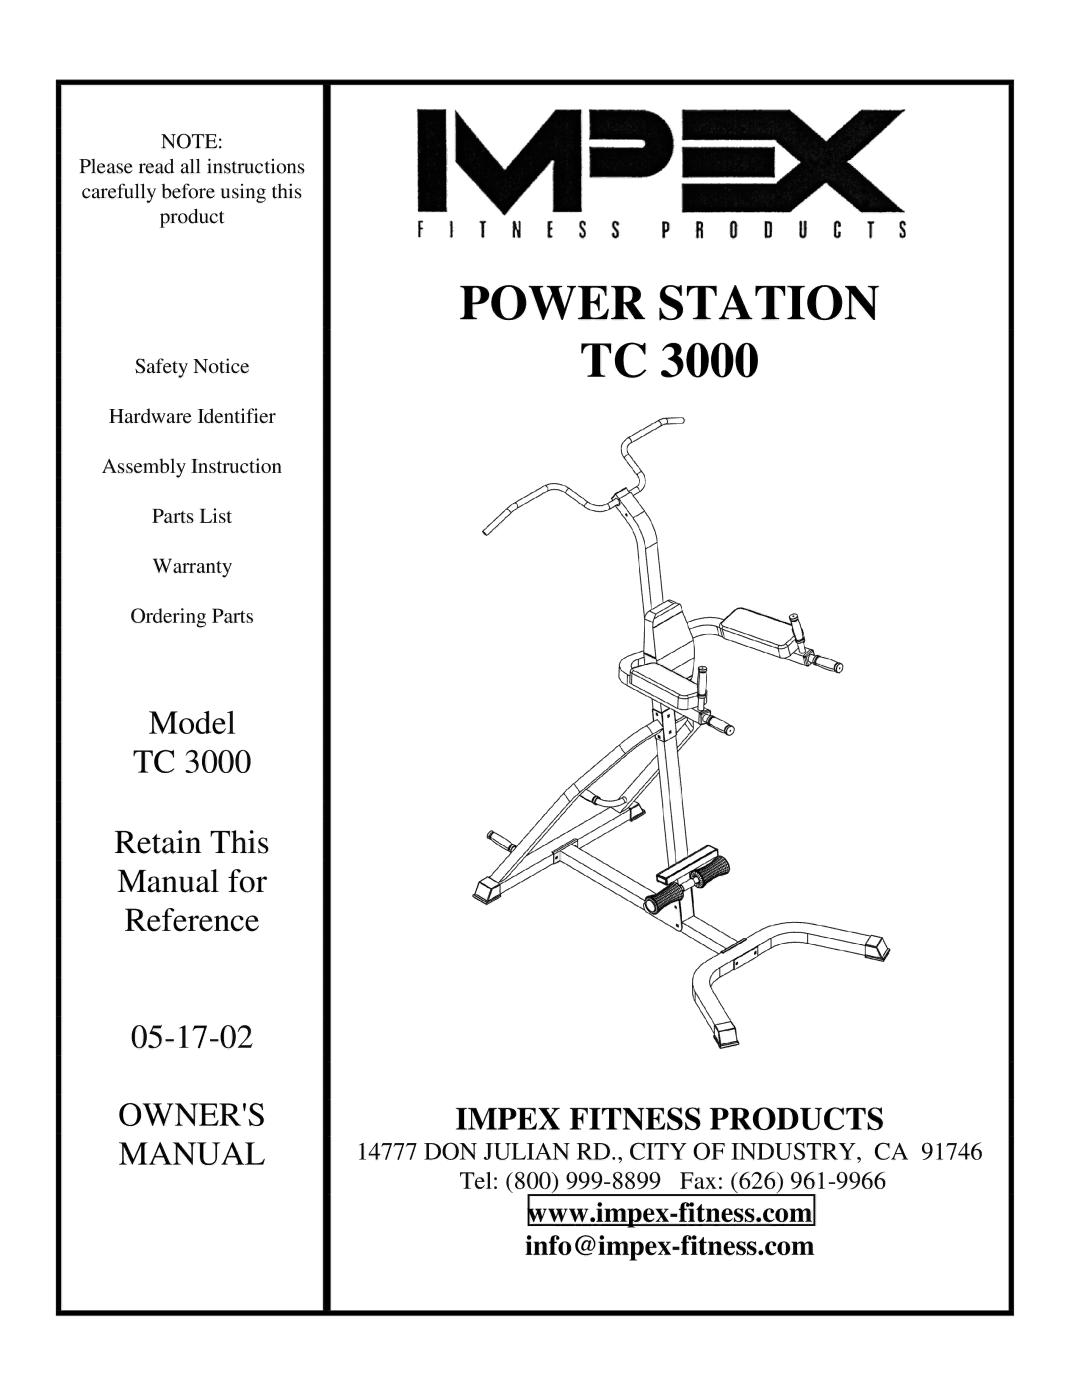 Impex TC 3000 manual Power Station 